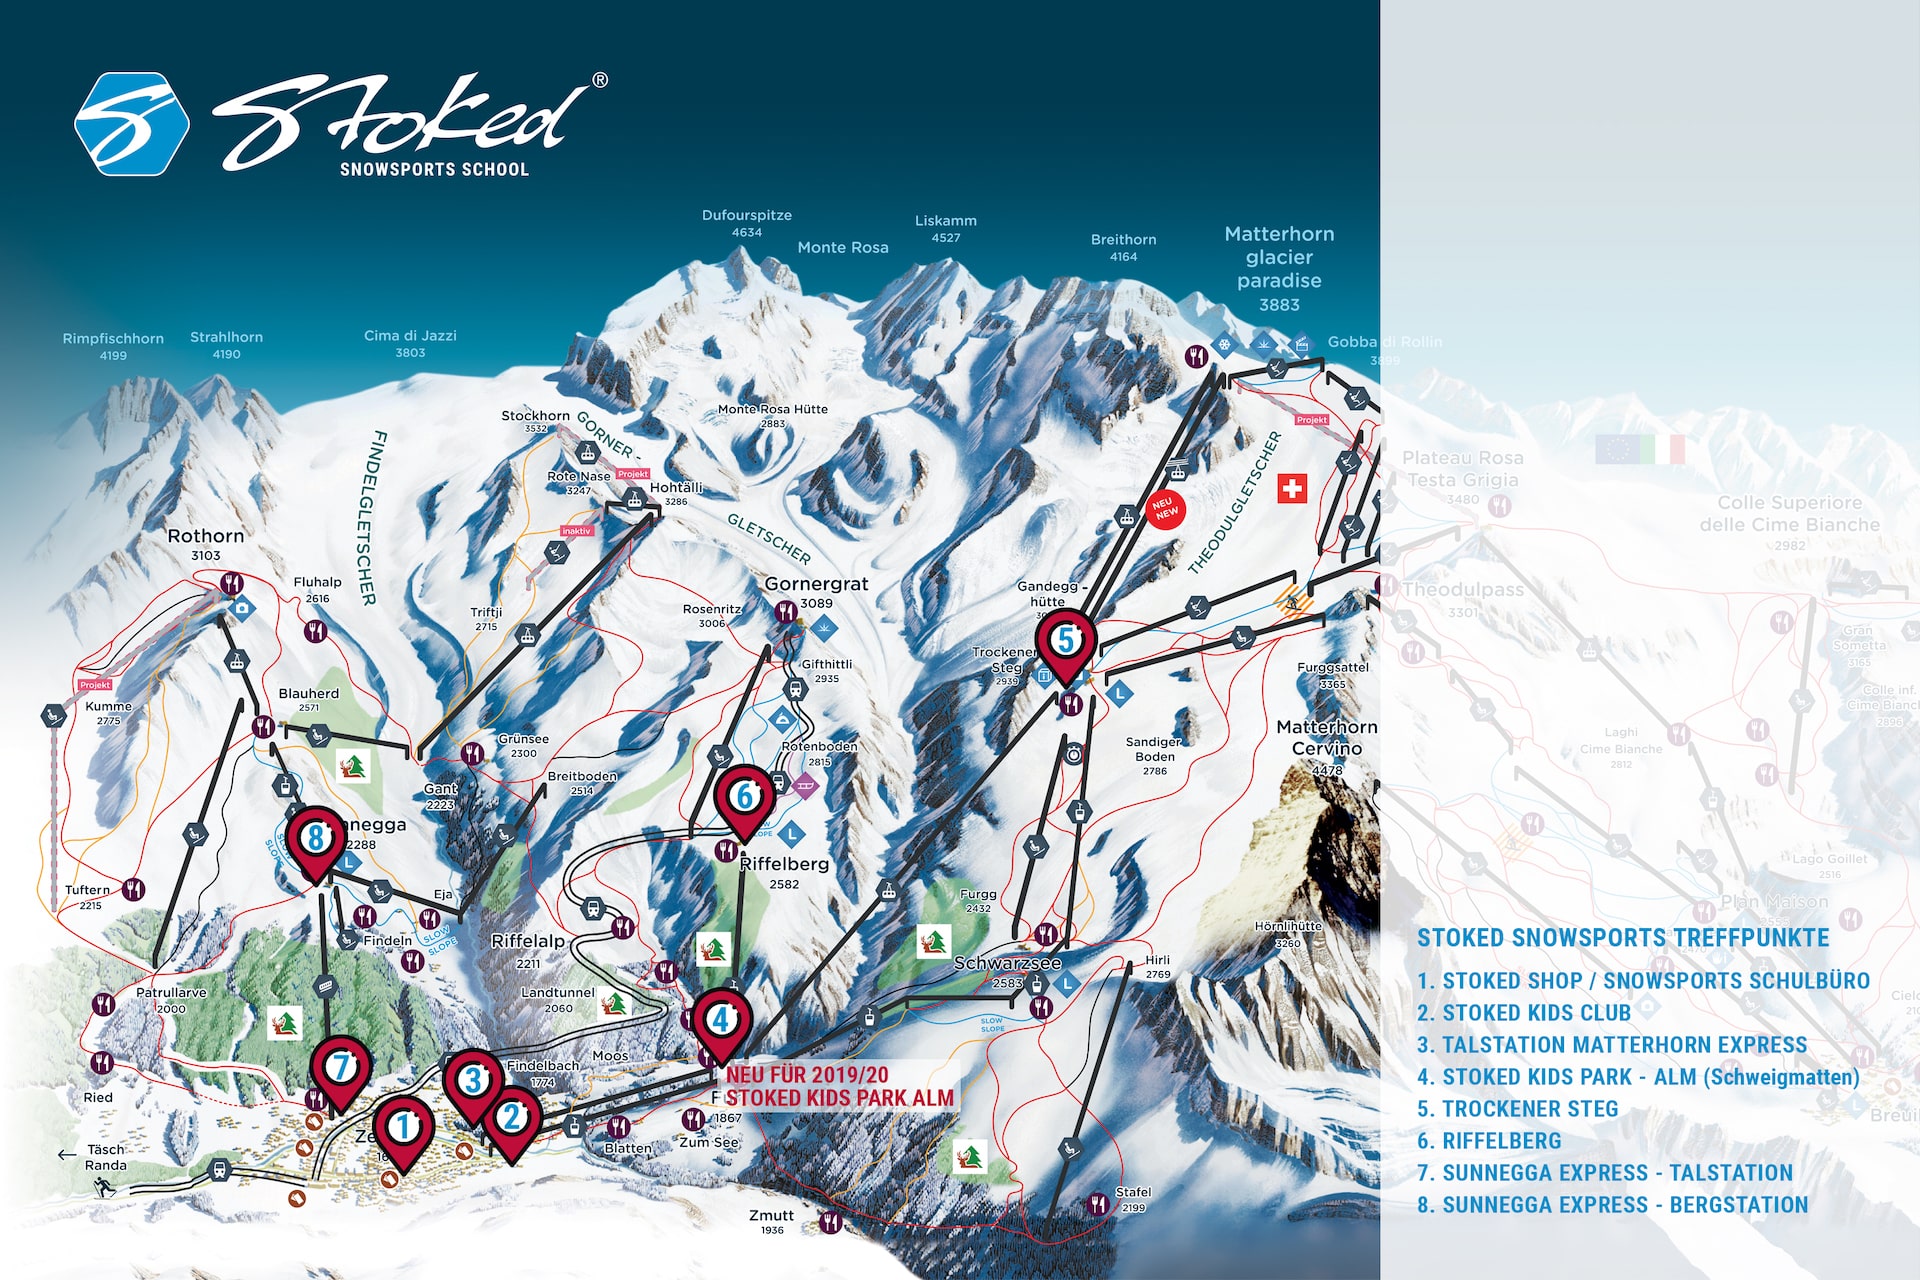 Stoked snowsports meeting points